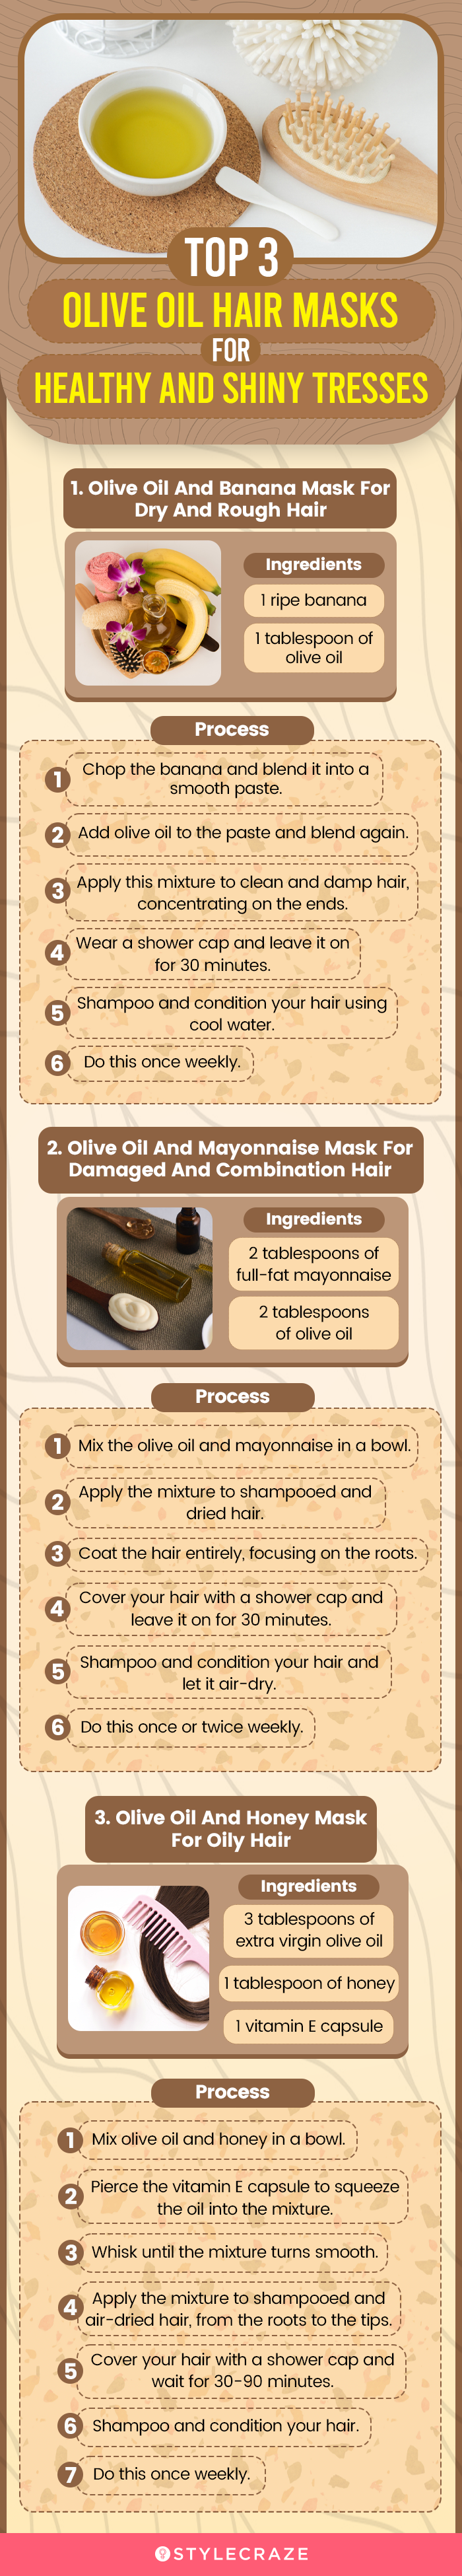 top 3 olive oil hair masks for healthy and shiny tresses (infographic)